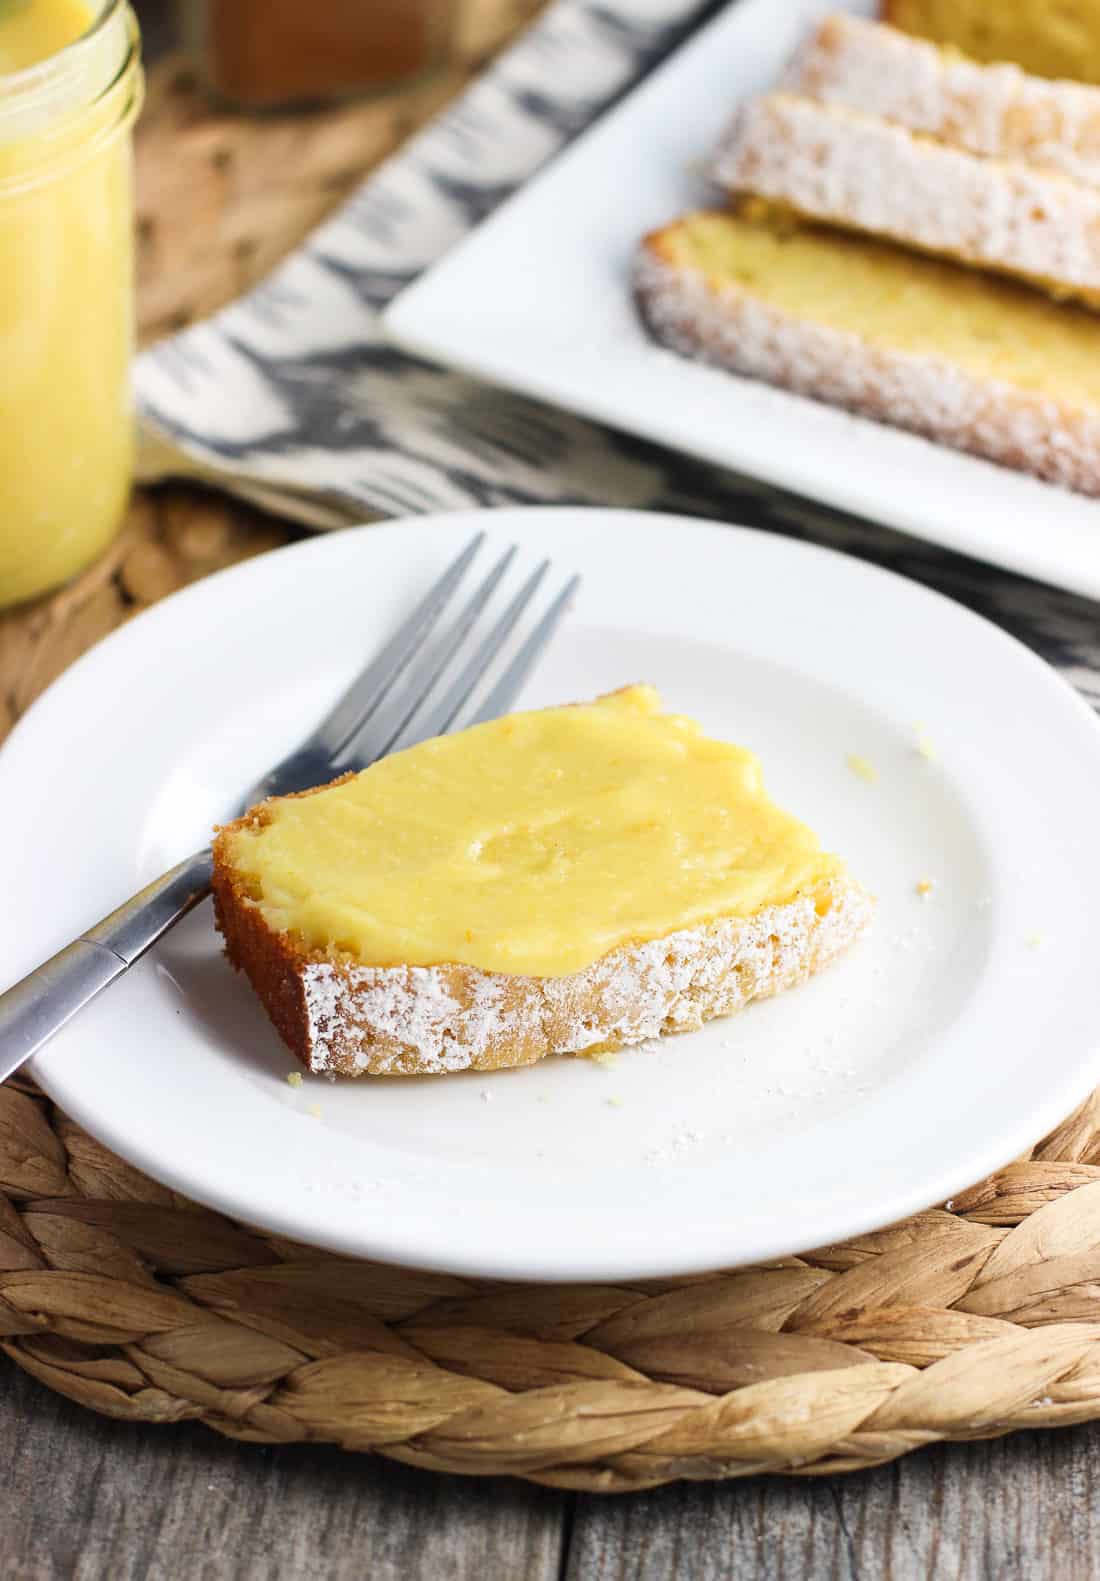 A slice of pound cake topped with citrus curd on a dessert plate with a fork